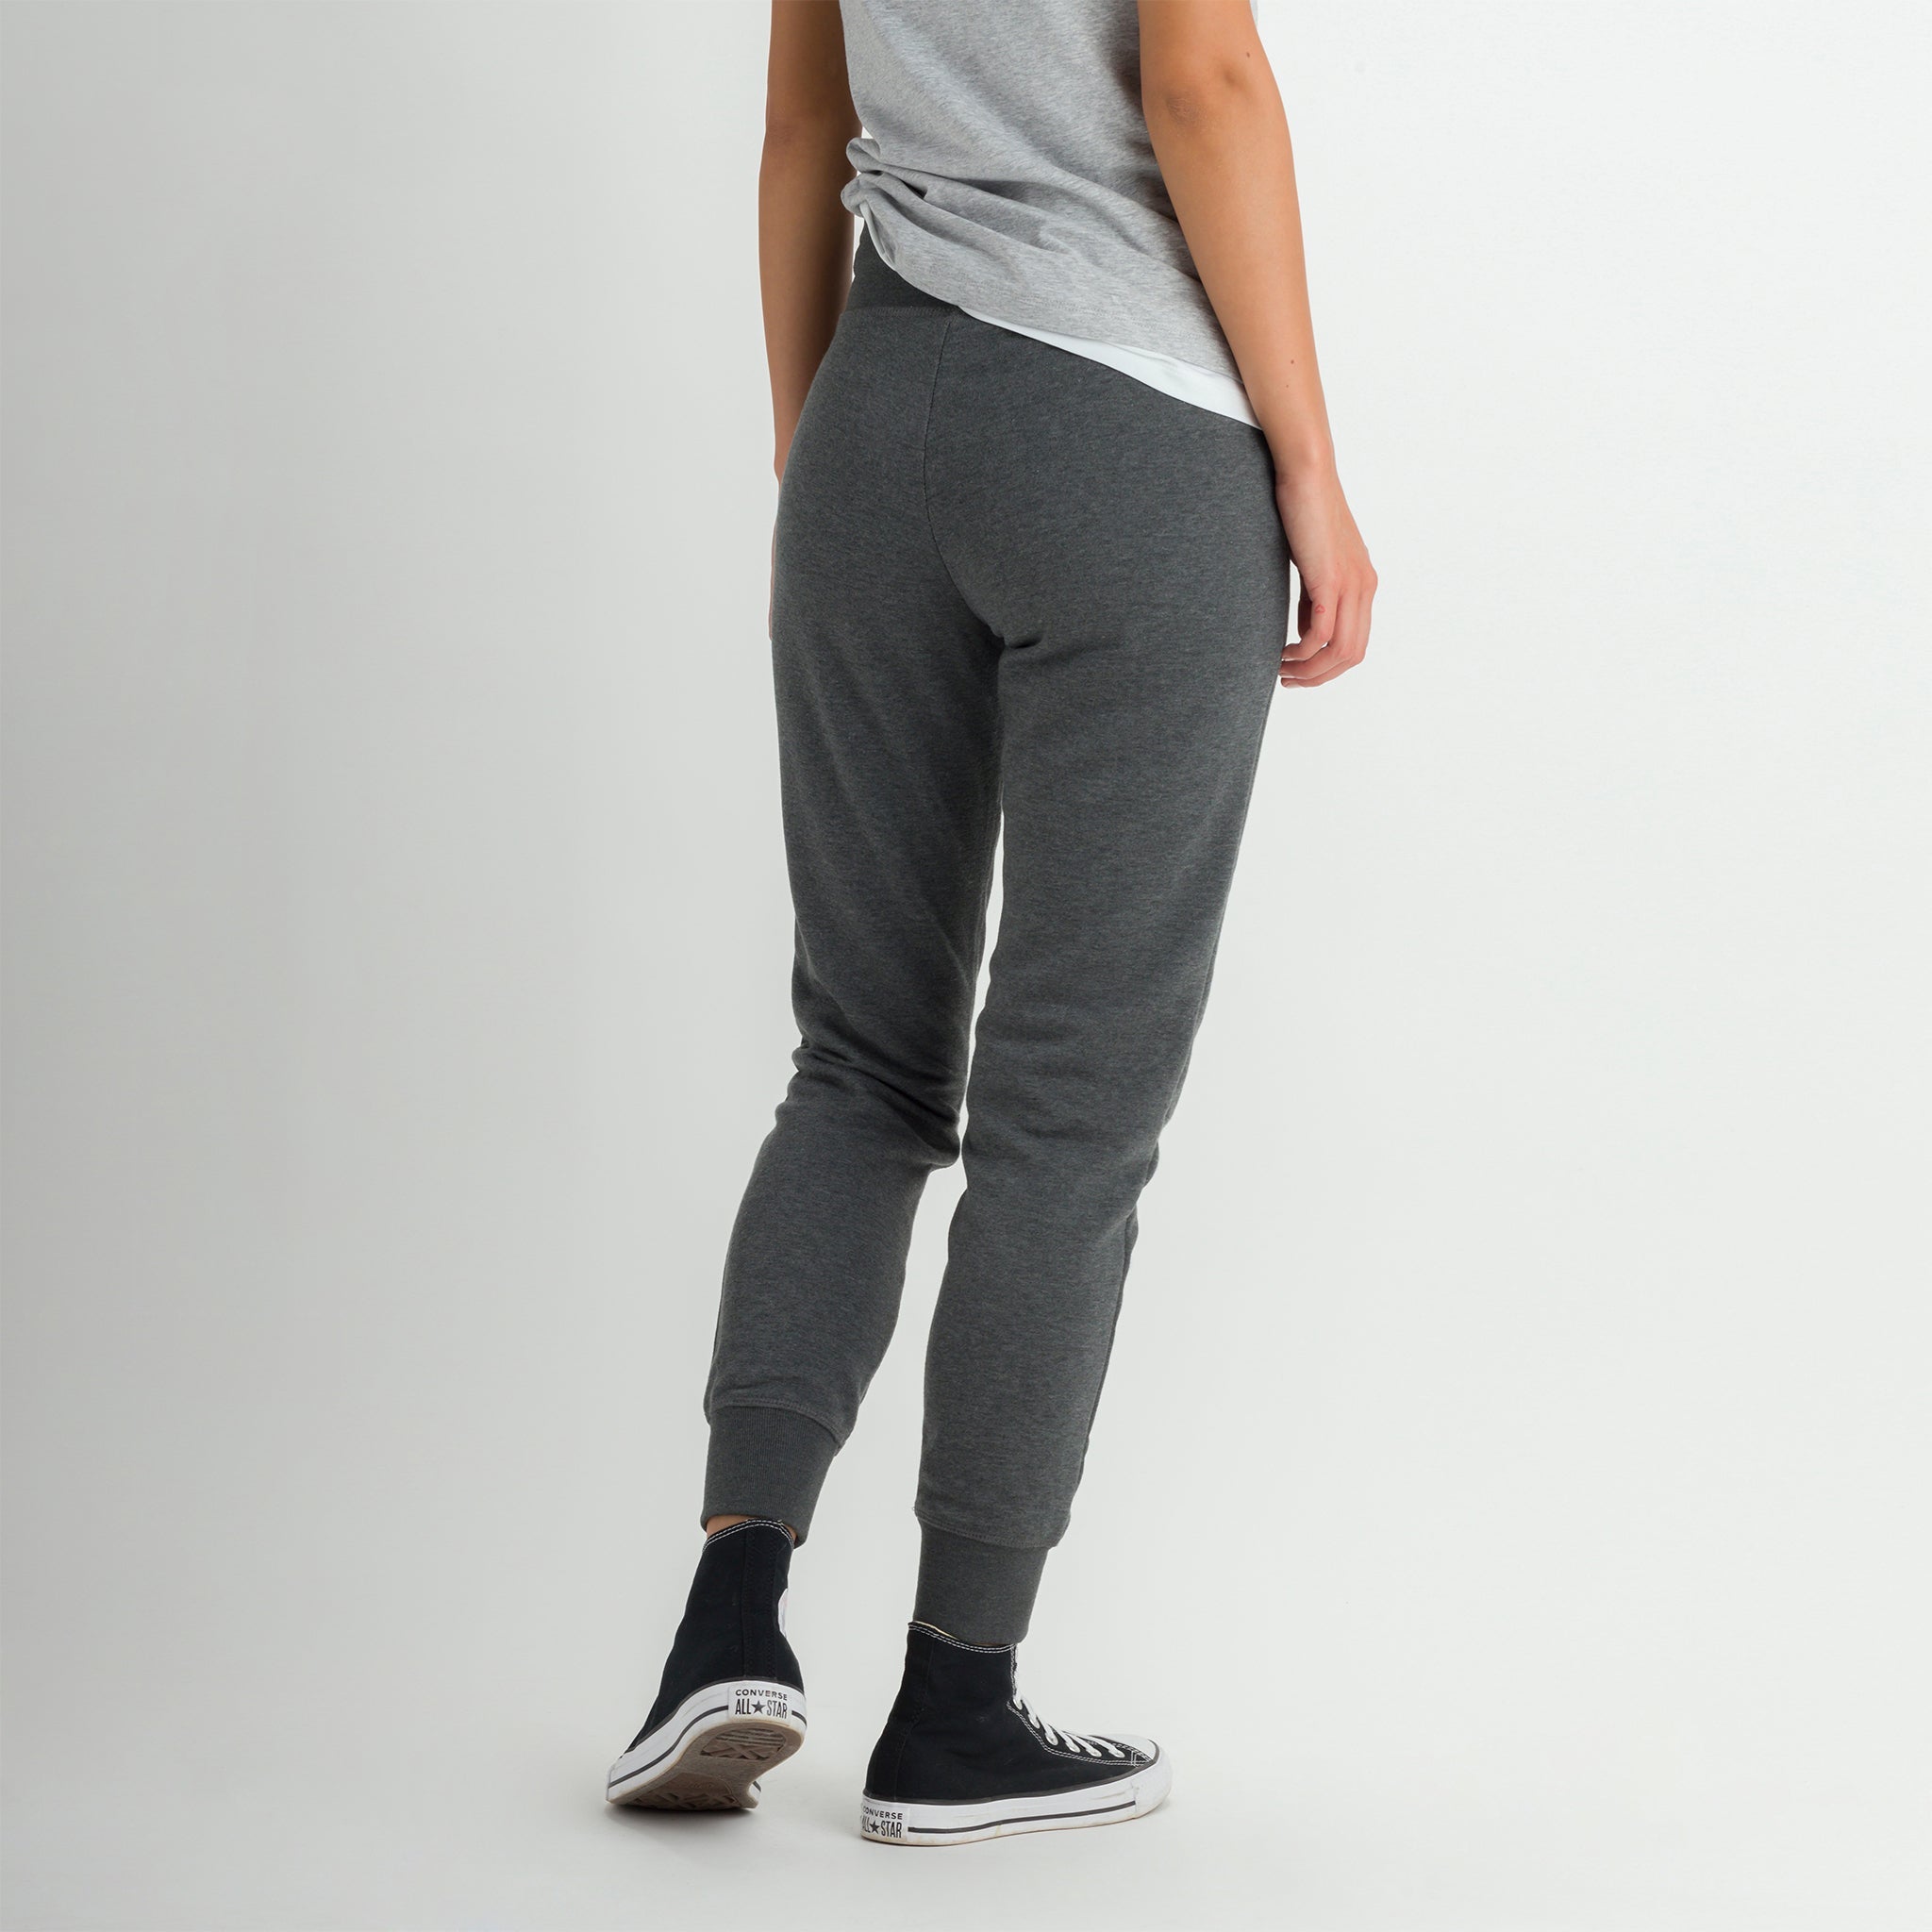 Women's Jogger Sweatpants, Sustainably-Made